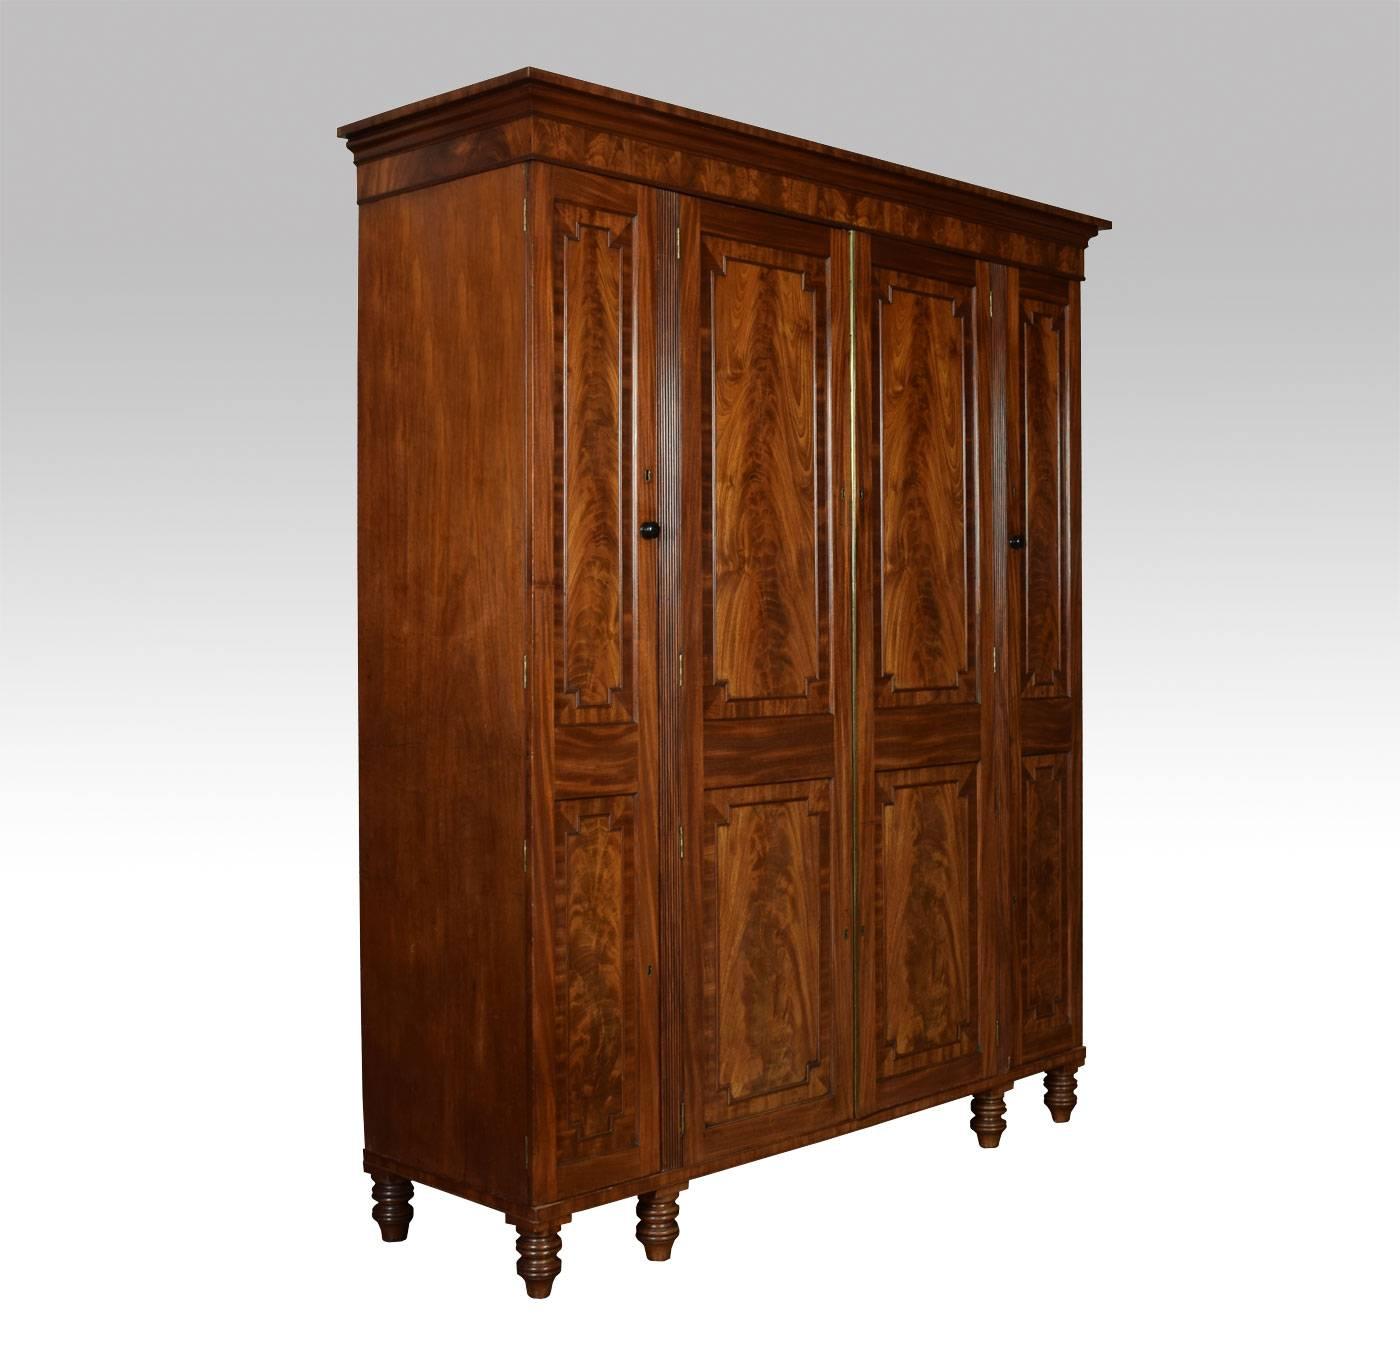 George IV mahogany wardrobe, attributed to Thomas Dowbiggin of Mount street. The moulded cornice above two central doors opening to reveal a press center with arrangement of sliding trays and draws below. The end sections with similar paneled doors